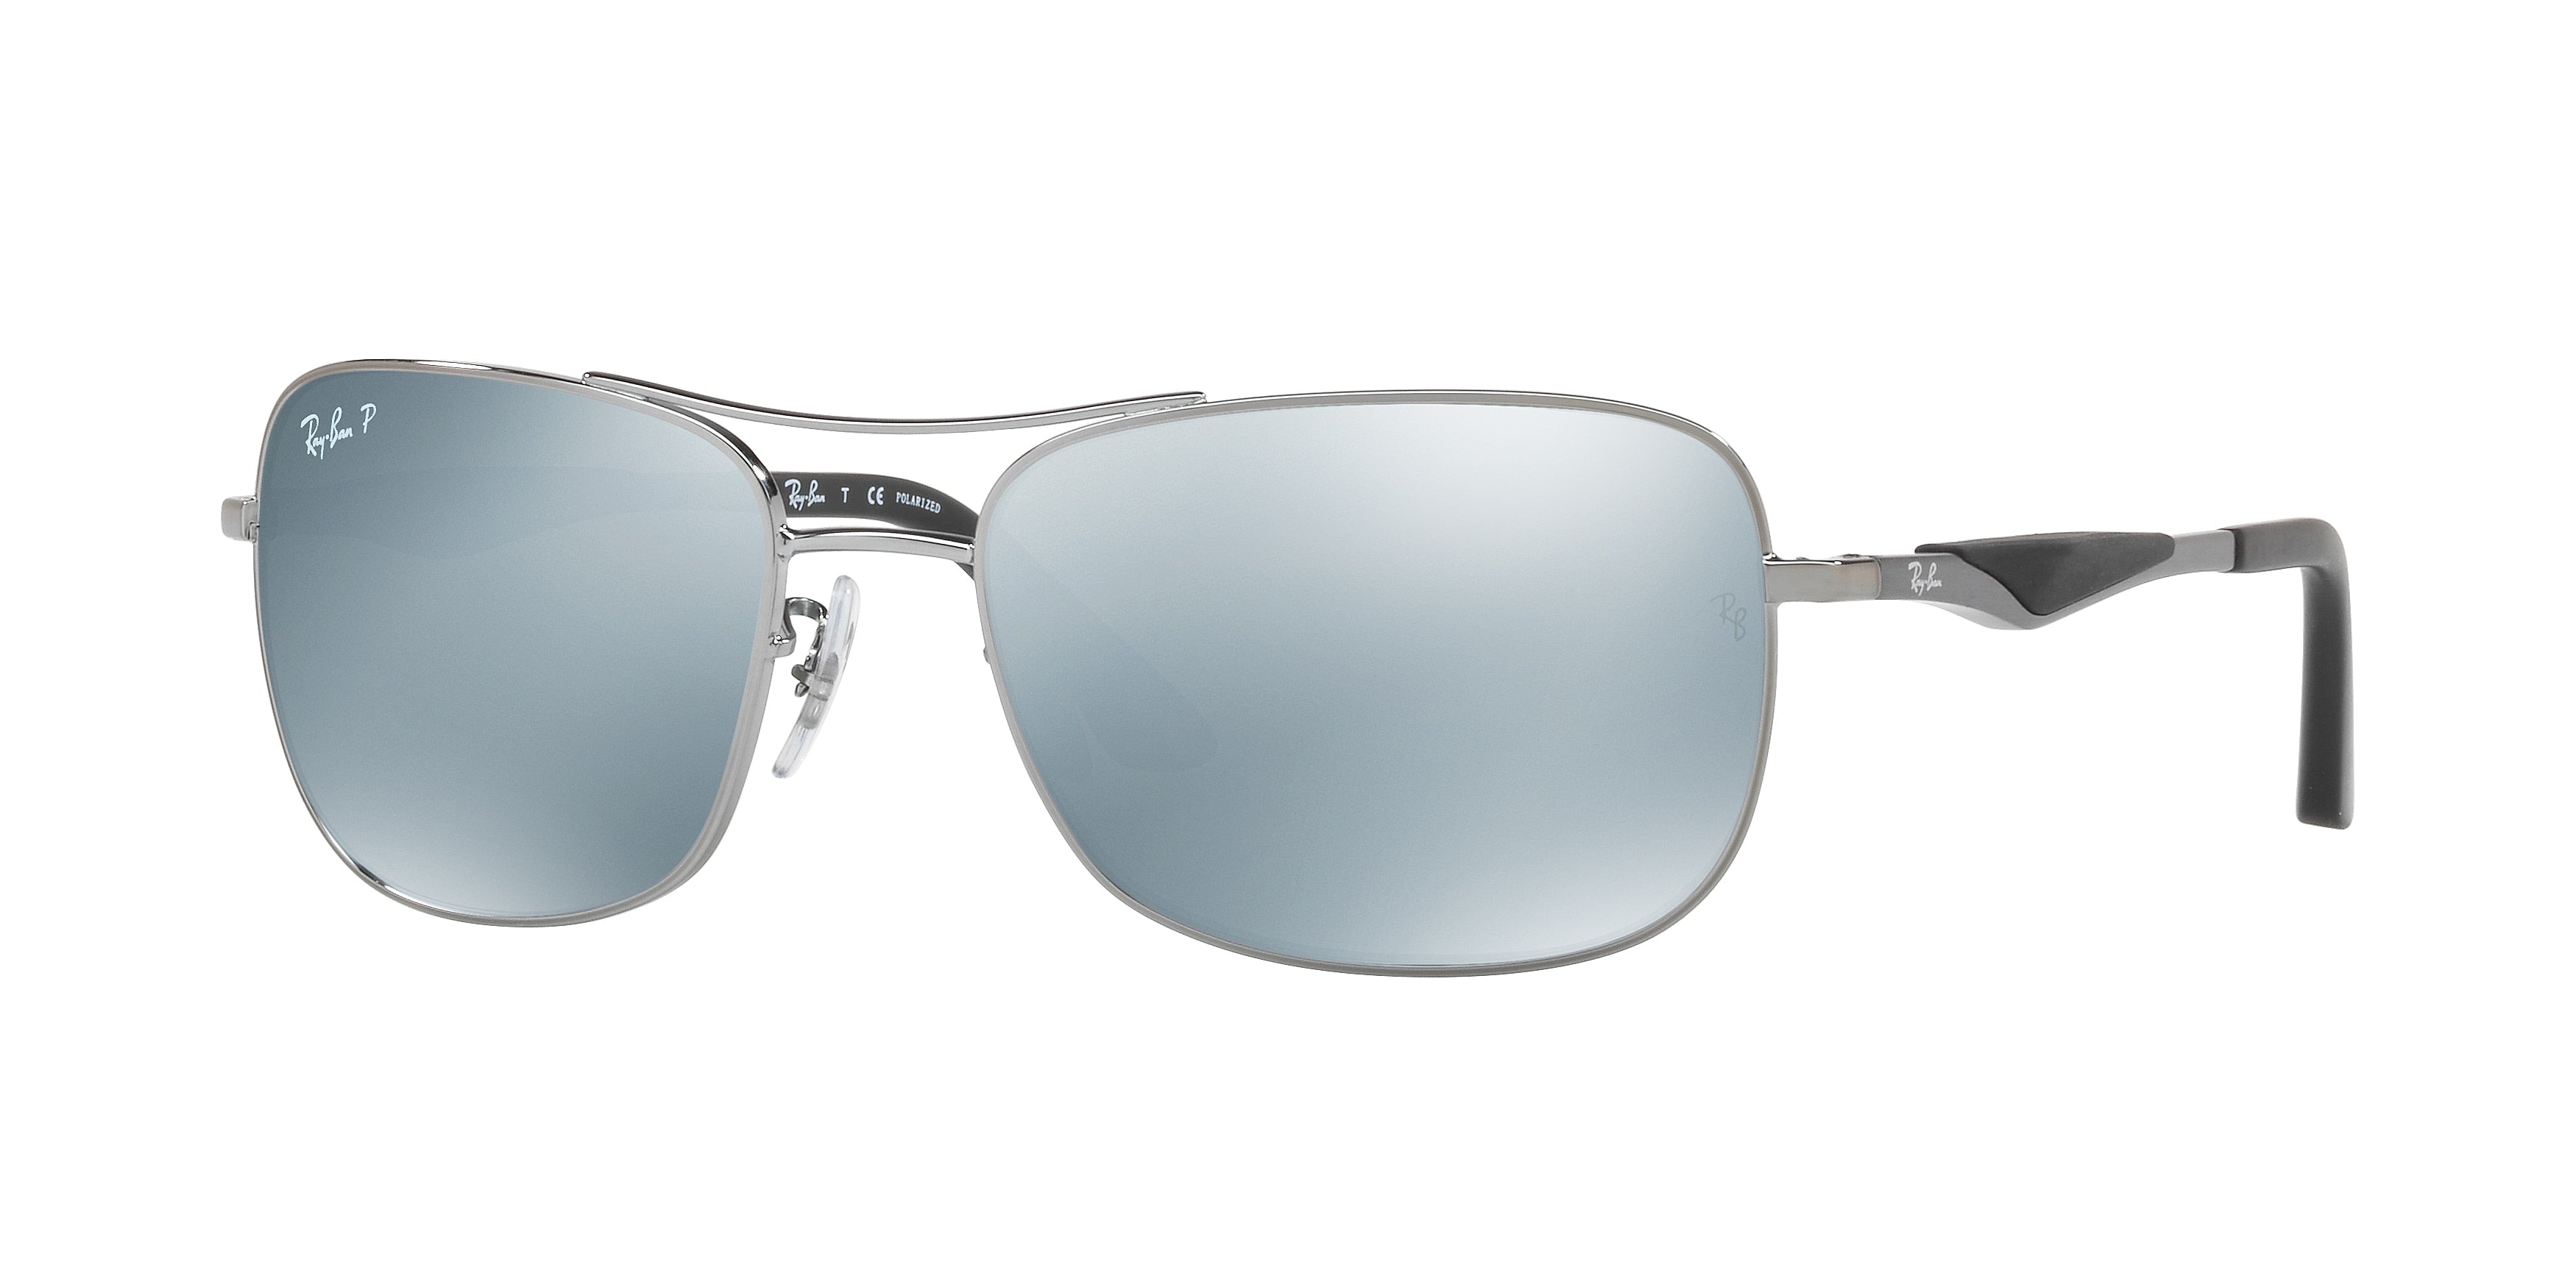 Ray-Ban RB3515 Square Sunglasses  004/Y4-Gunmetal 61-145-17 - Color Map Grey